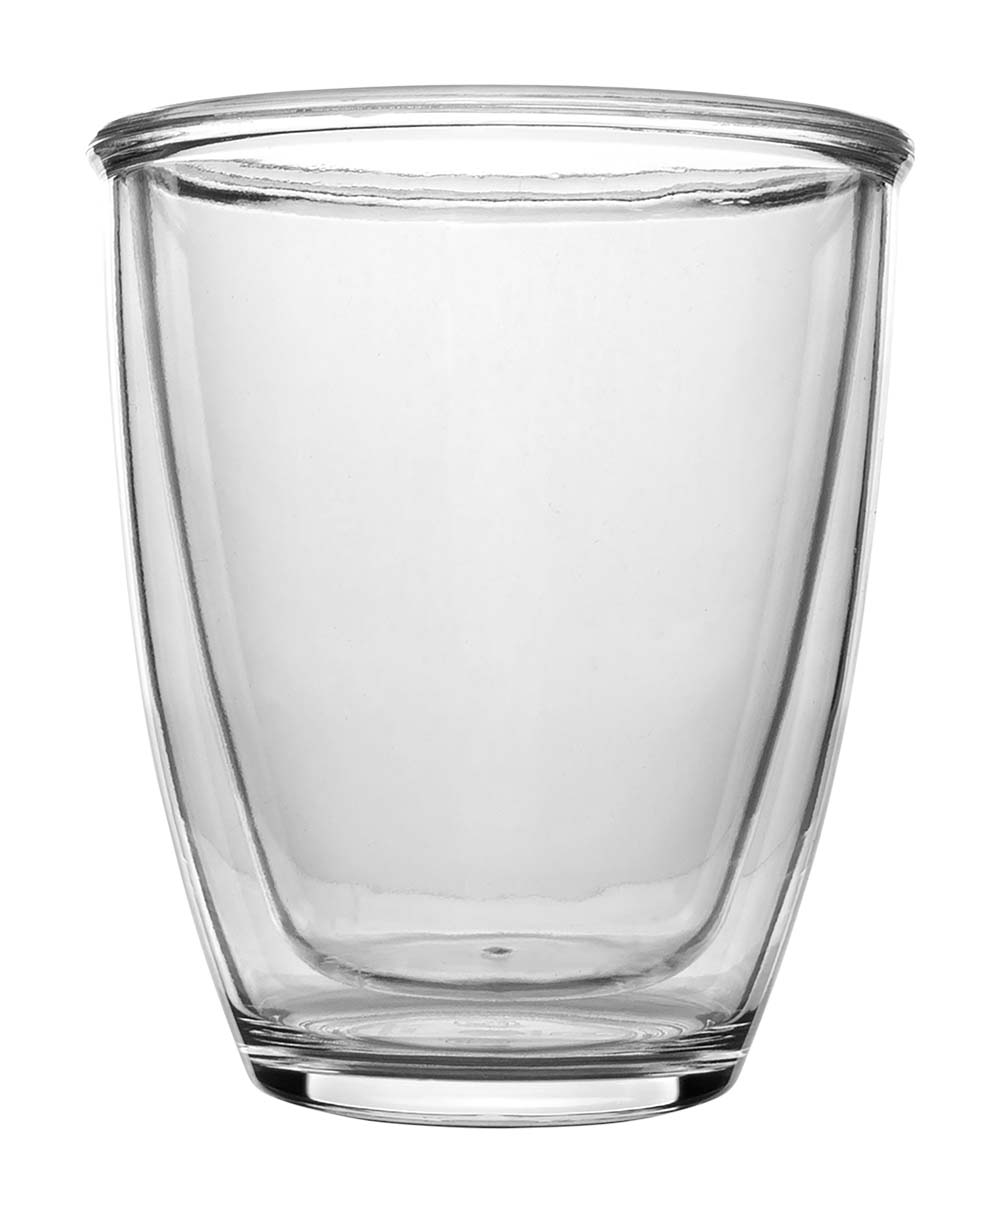 6101325 Very convenient double walled glasses. The double walled glasses have multible advantages. The air between the two walls provides an insulating effect. The drink in the glasses will be kept warm longer. Also the glasses can be held easisly with warm drinks. The outer wall does not get as hot as the first wall. The glasses are made of polycarbonate, making them very strong and virtually unbreakable. Also available as 1 piece